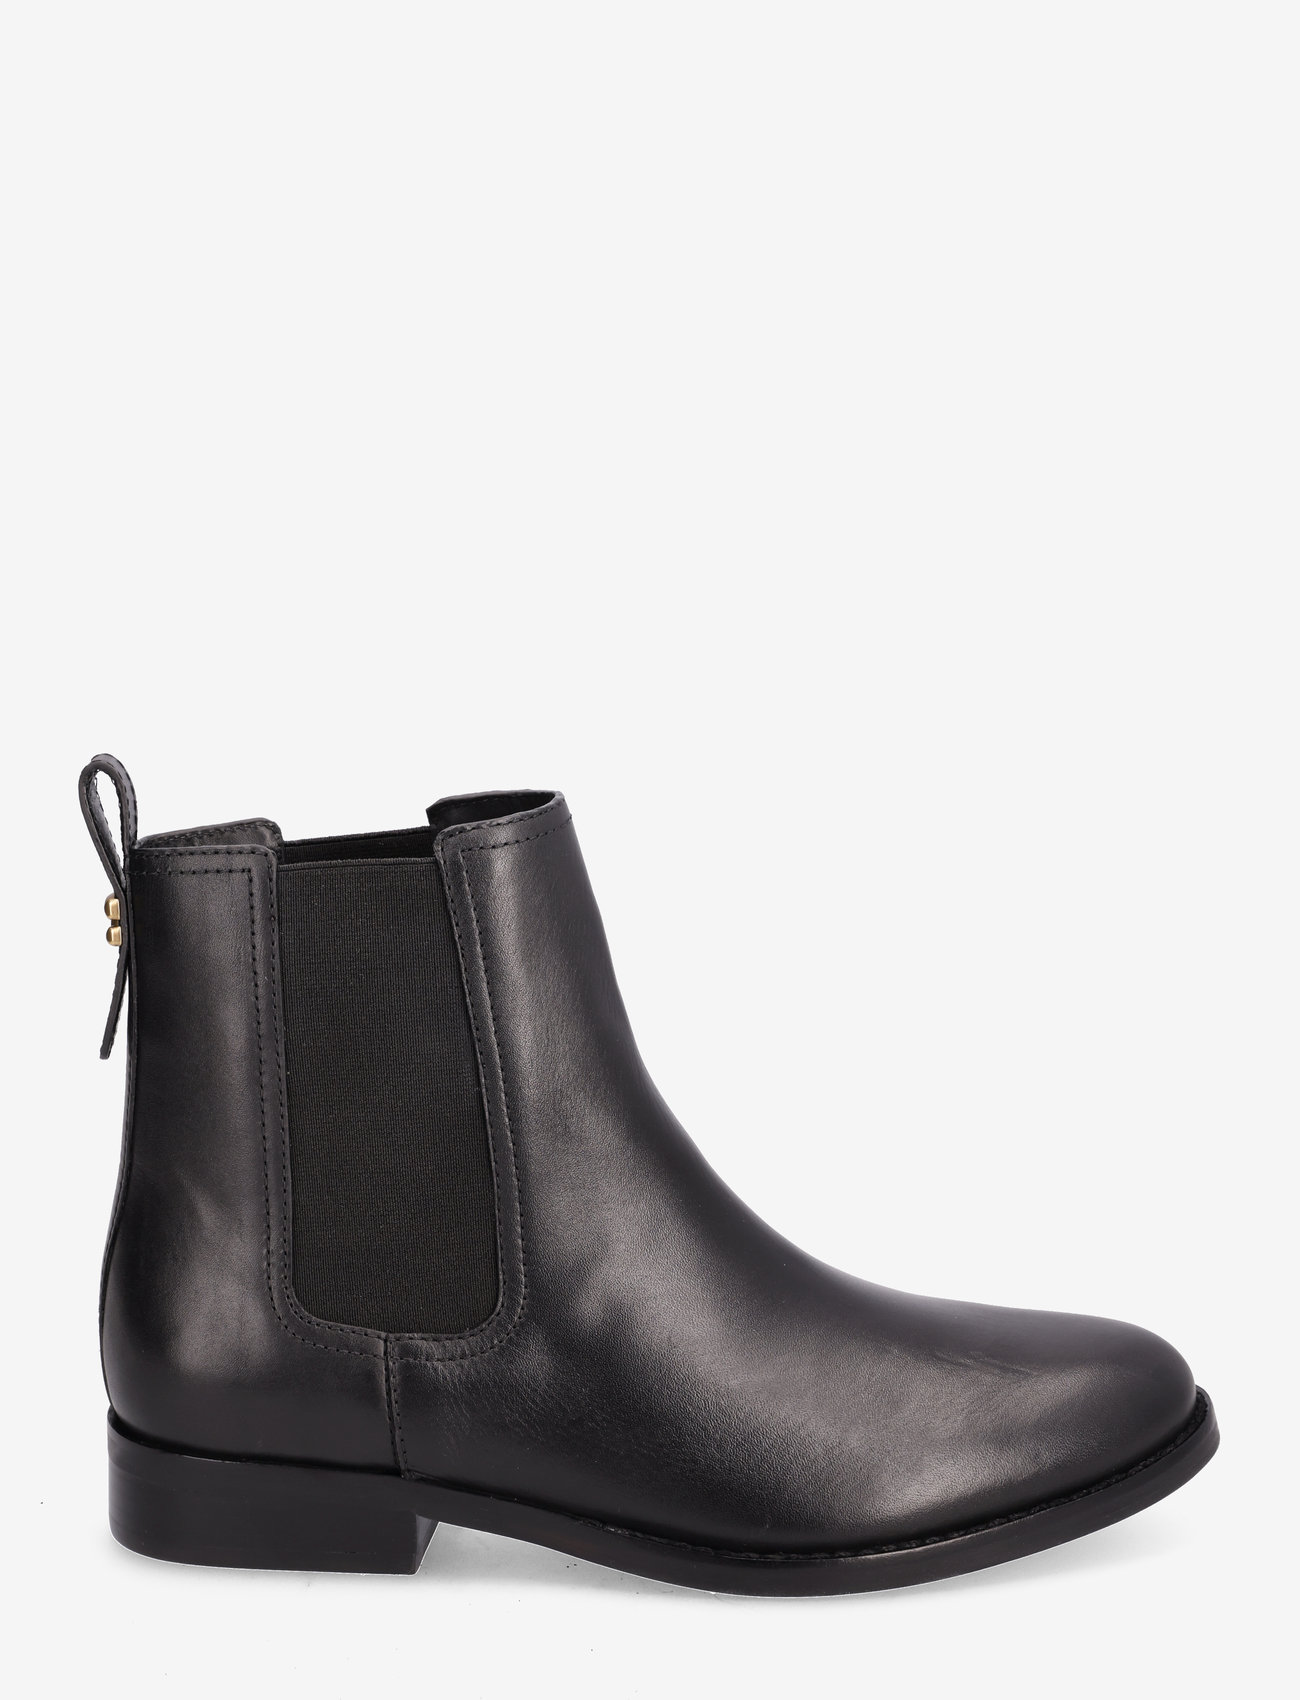 Coach - MAEVE LTH BOOTIE - flat ankle boots - black - 1